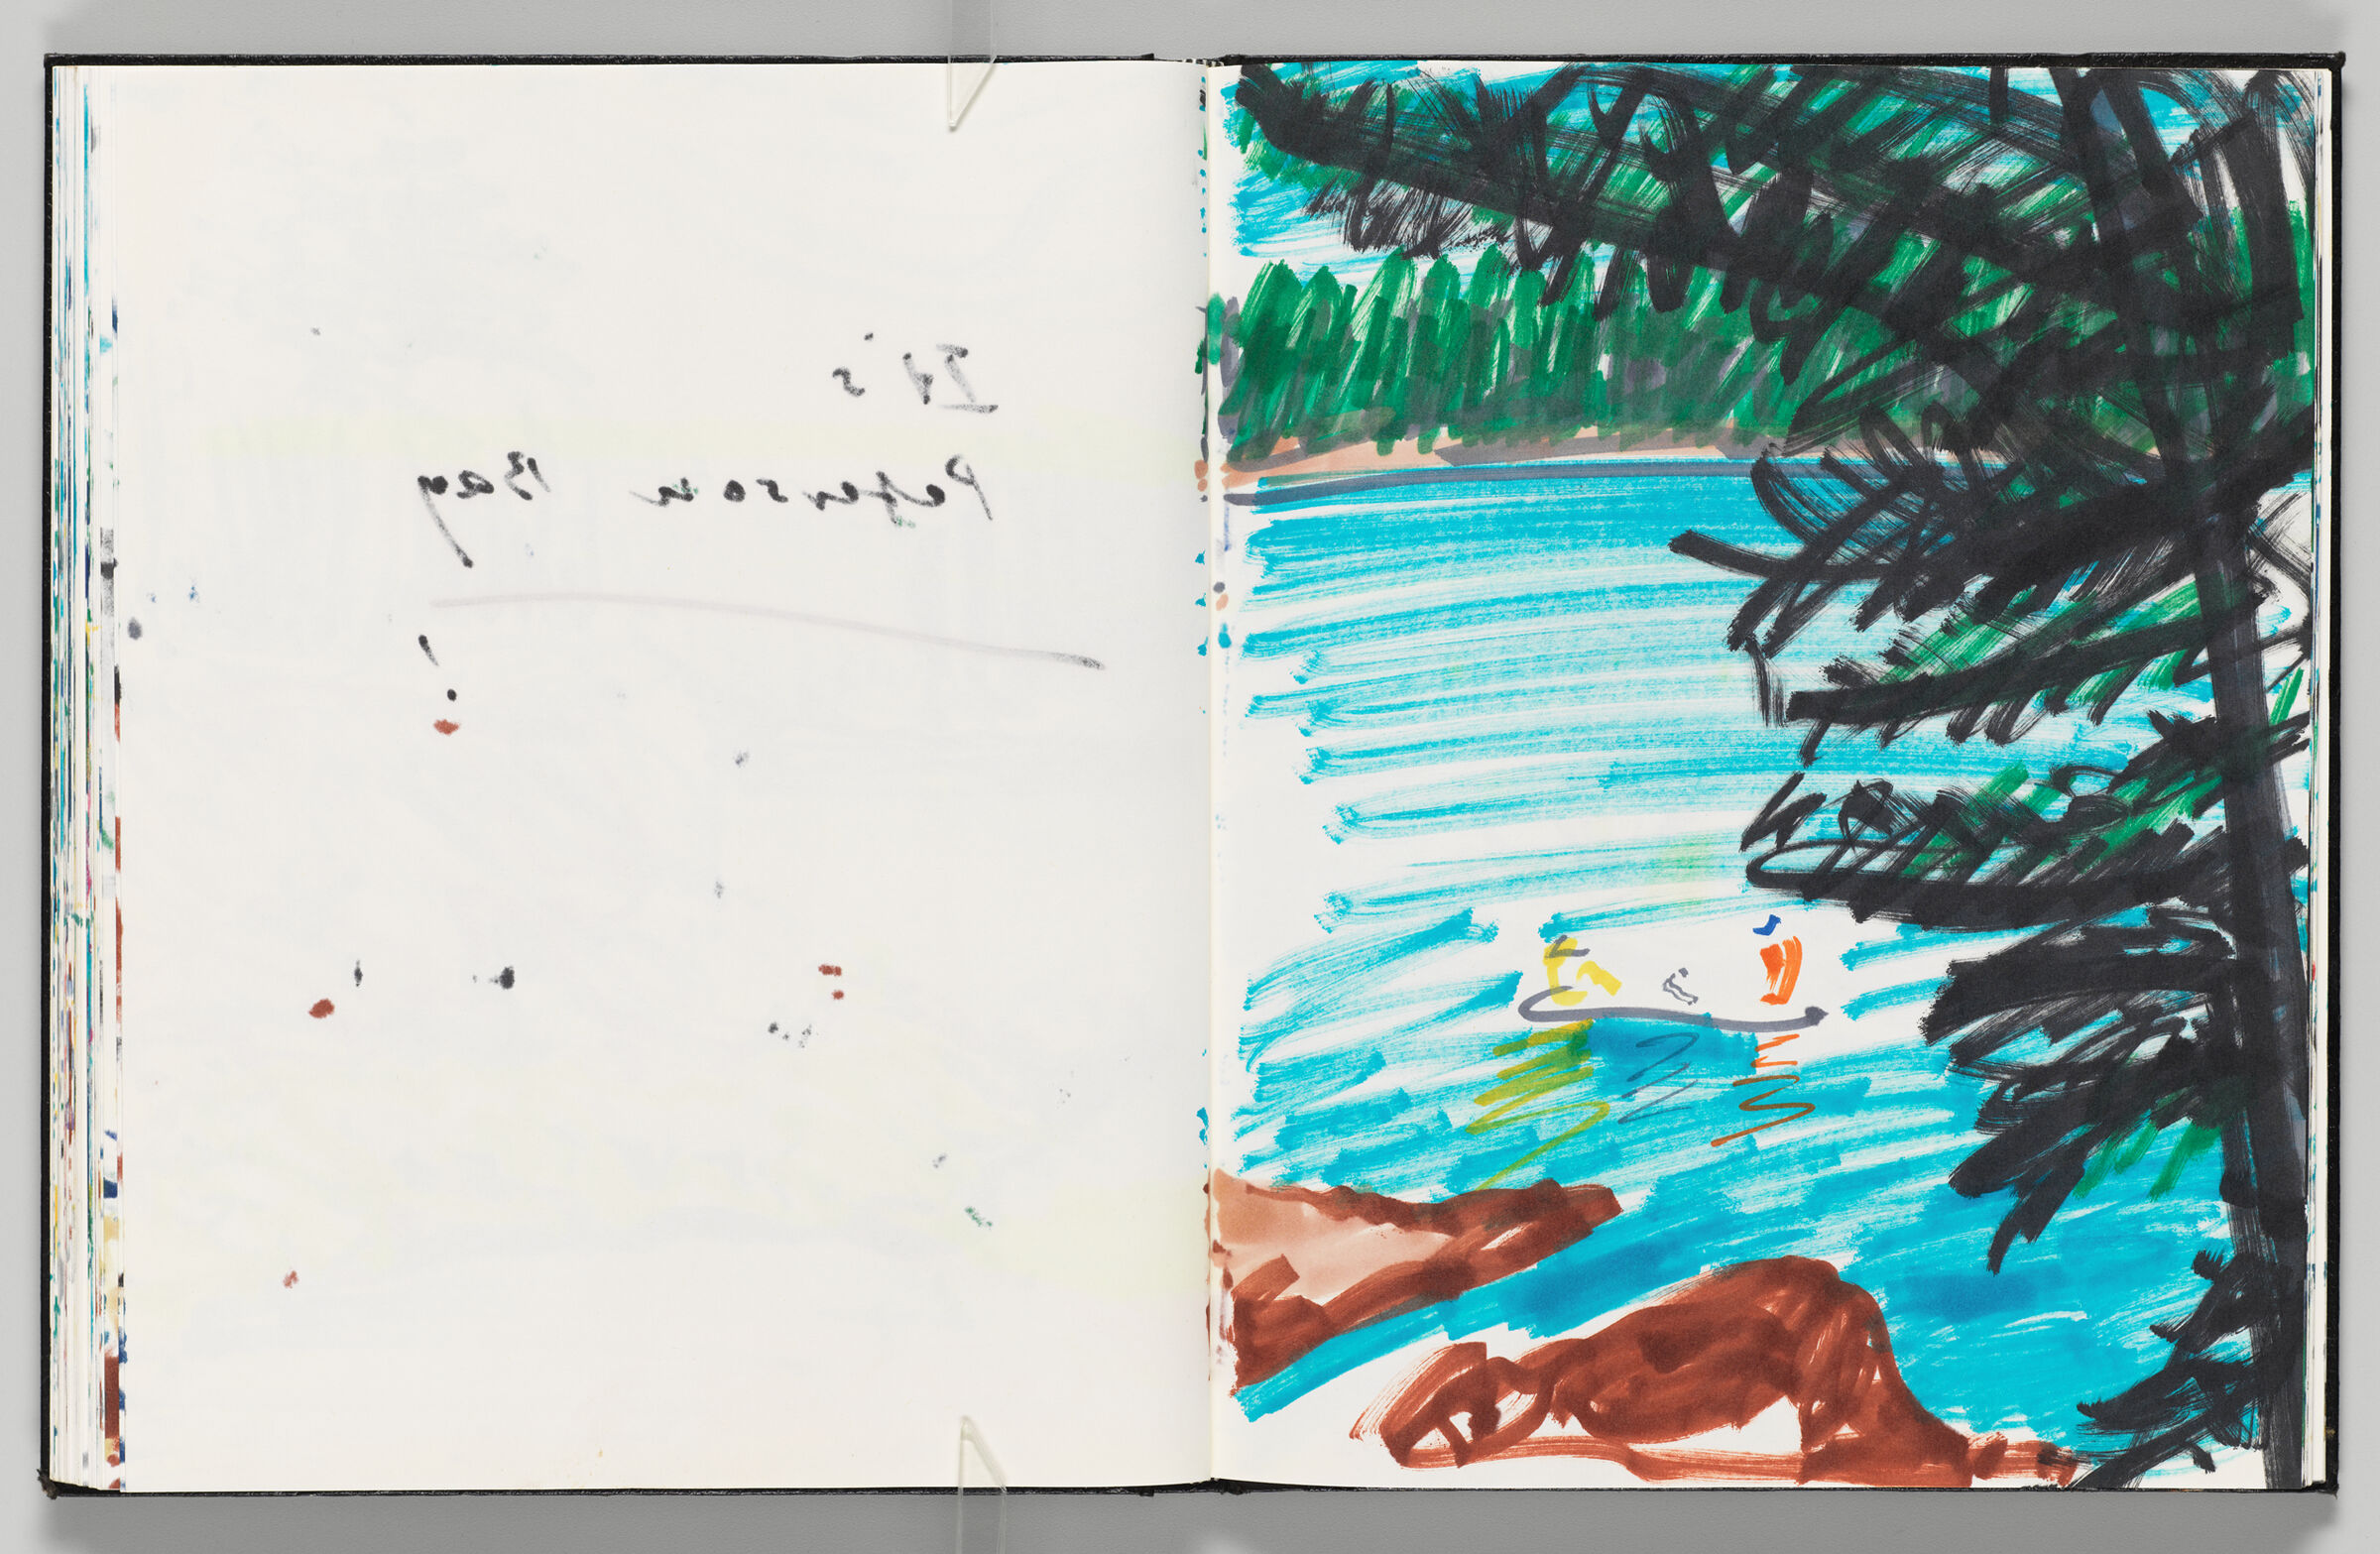 Untitled (Bleed-Through Of Previous Page, Left Page); Untitled (View Of Bay In Alabama, Right Page)